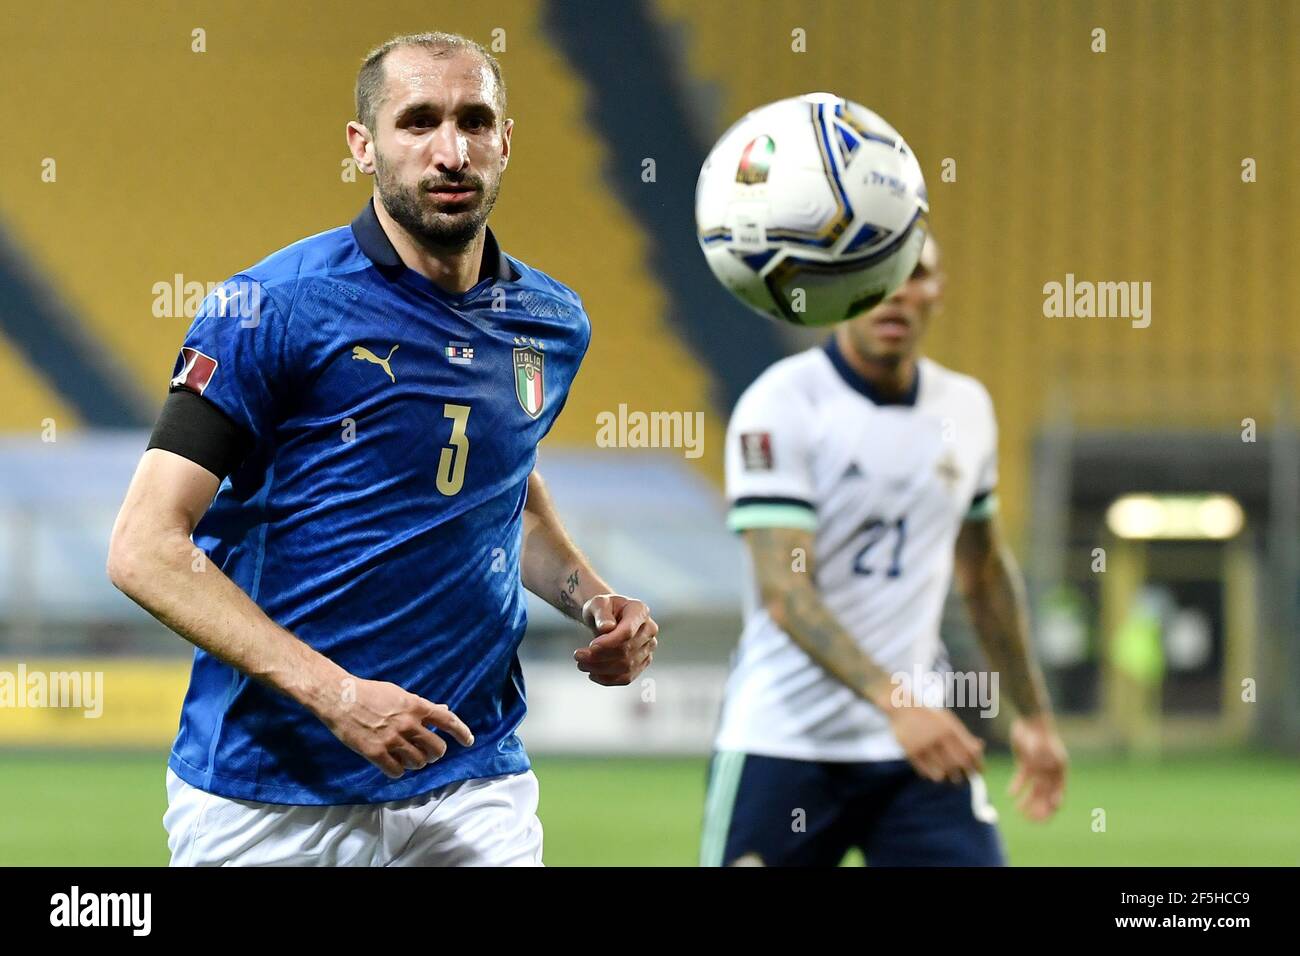 Parma, Italy. 25th Mar, 2021. Giorgio Chiellini of Italy in action during the FIFA World Cup 2022 qualification football match between Italy and Northerrn Ireland at stadio Ennio Tardini in Parma (Italy), March 25th, 2021. Photo Andrea Staccioli/Insidefoto Credit: insidefoto srl/Alamy Live News Stock Photo